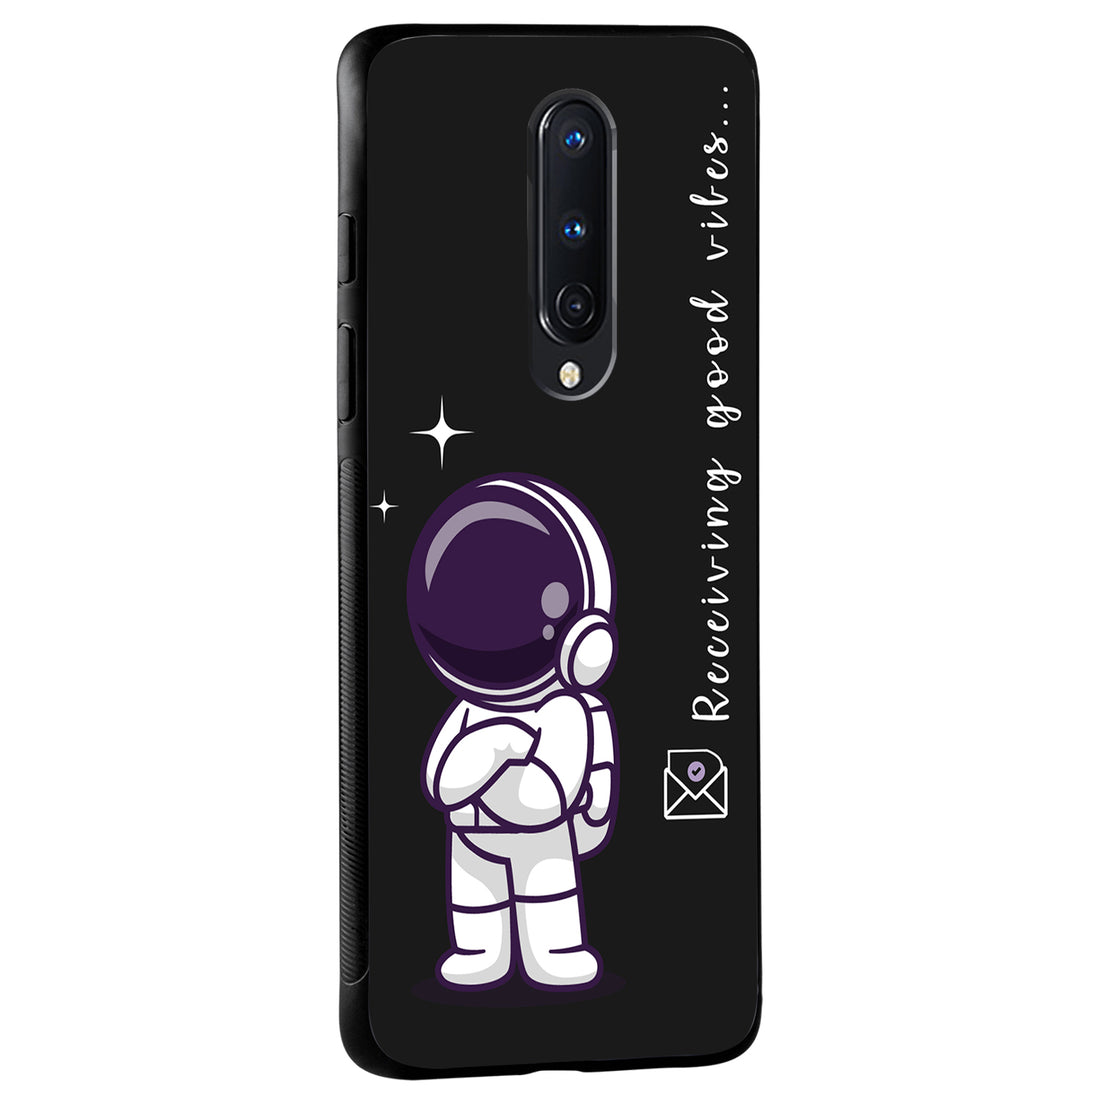 Receiving Good Vibes Bff Oneplus 8 Back Case